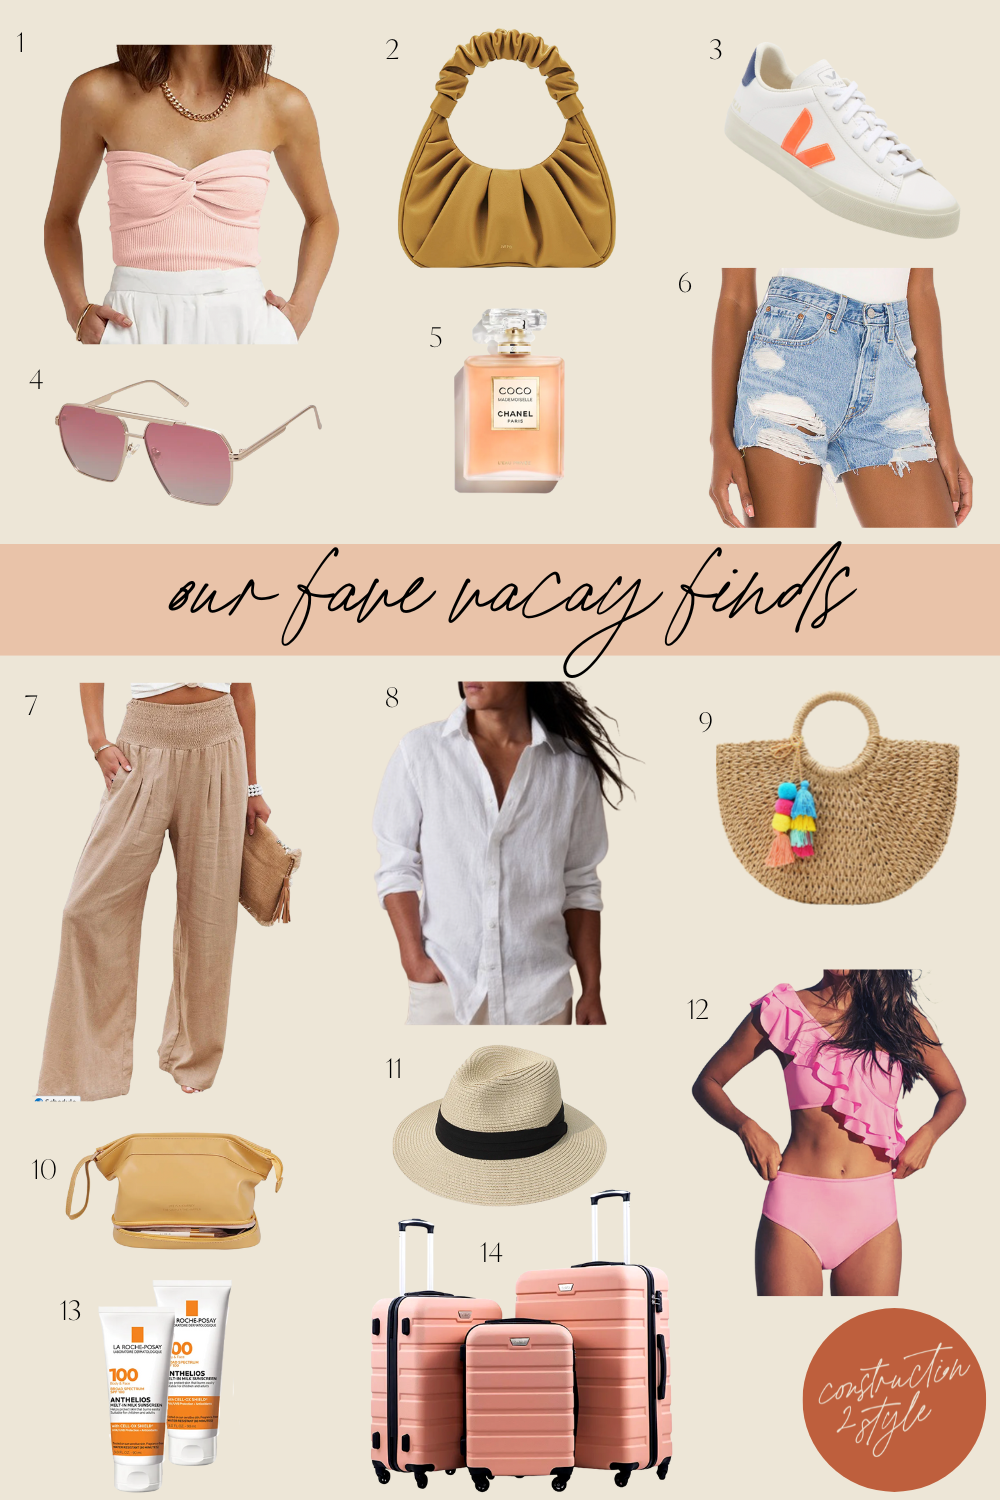 Beach Vacation or Mountain Getaway? Travel Destination and Outfit Ideas 7